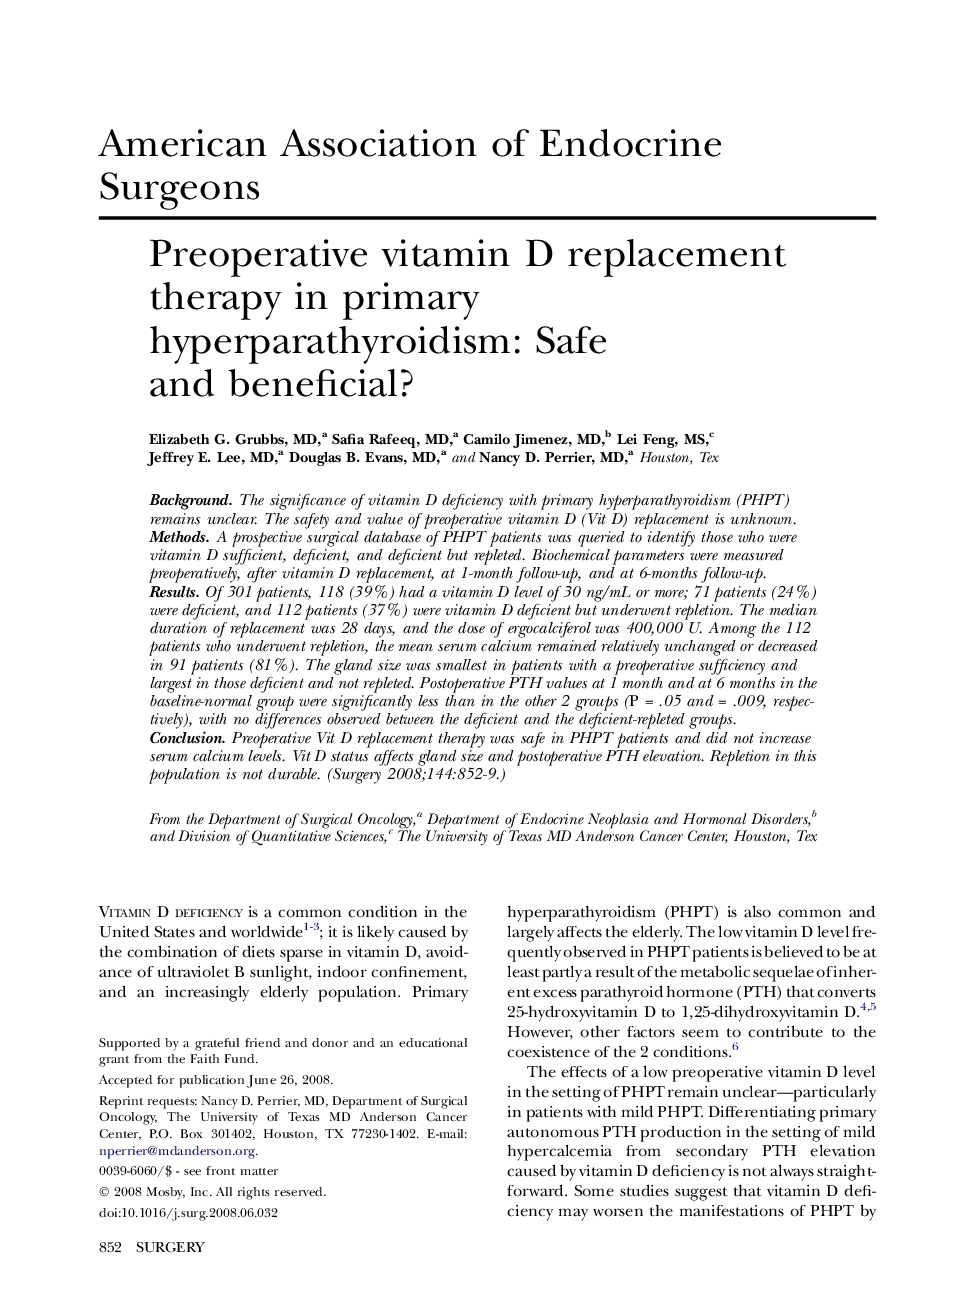 Preoperative vitamin D replacement therapy in primary hyperparathyroidism: Safe and beneficial? 